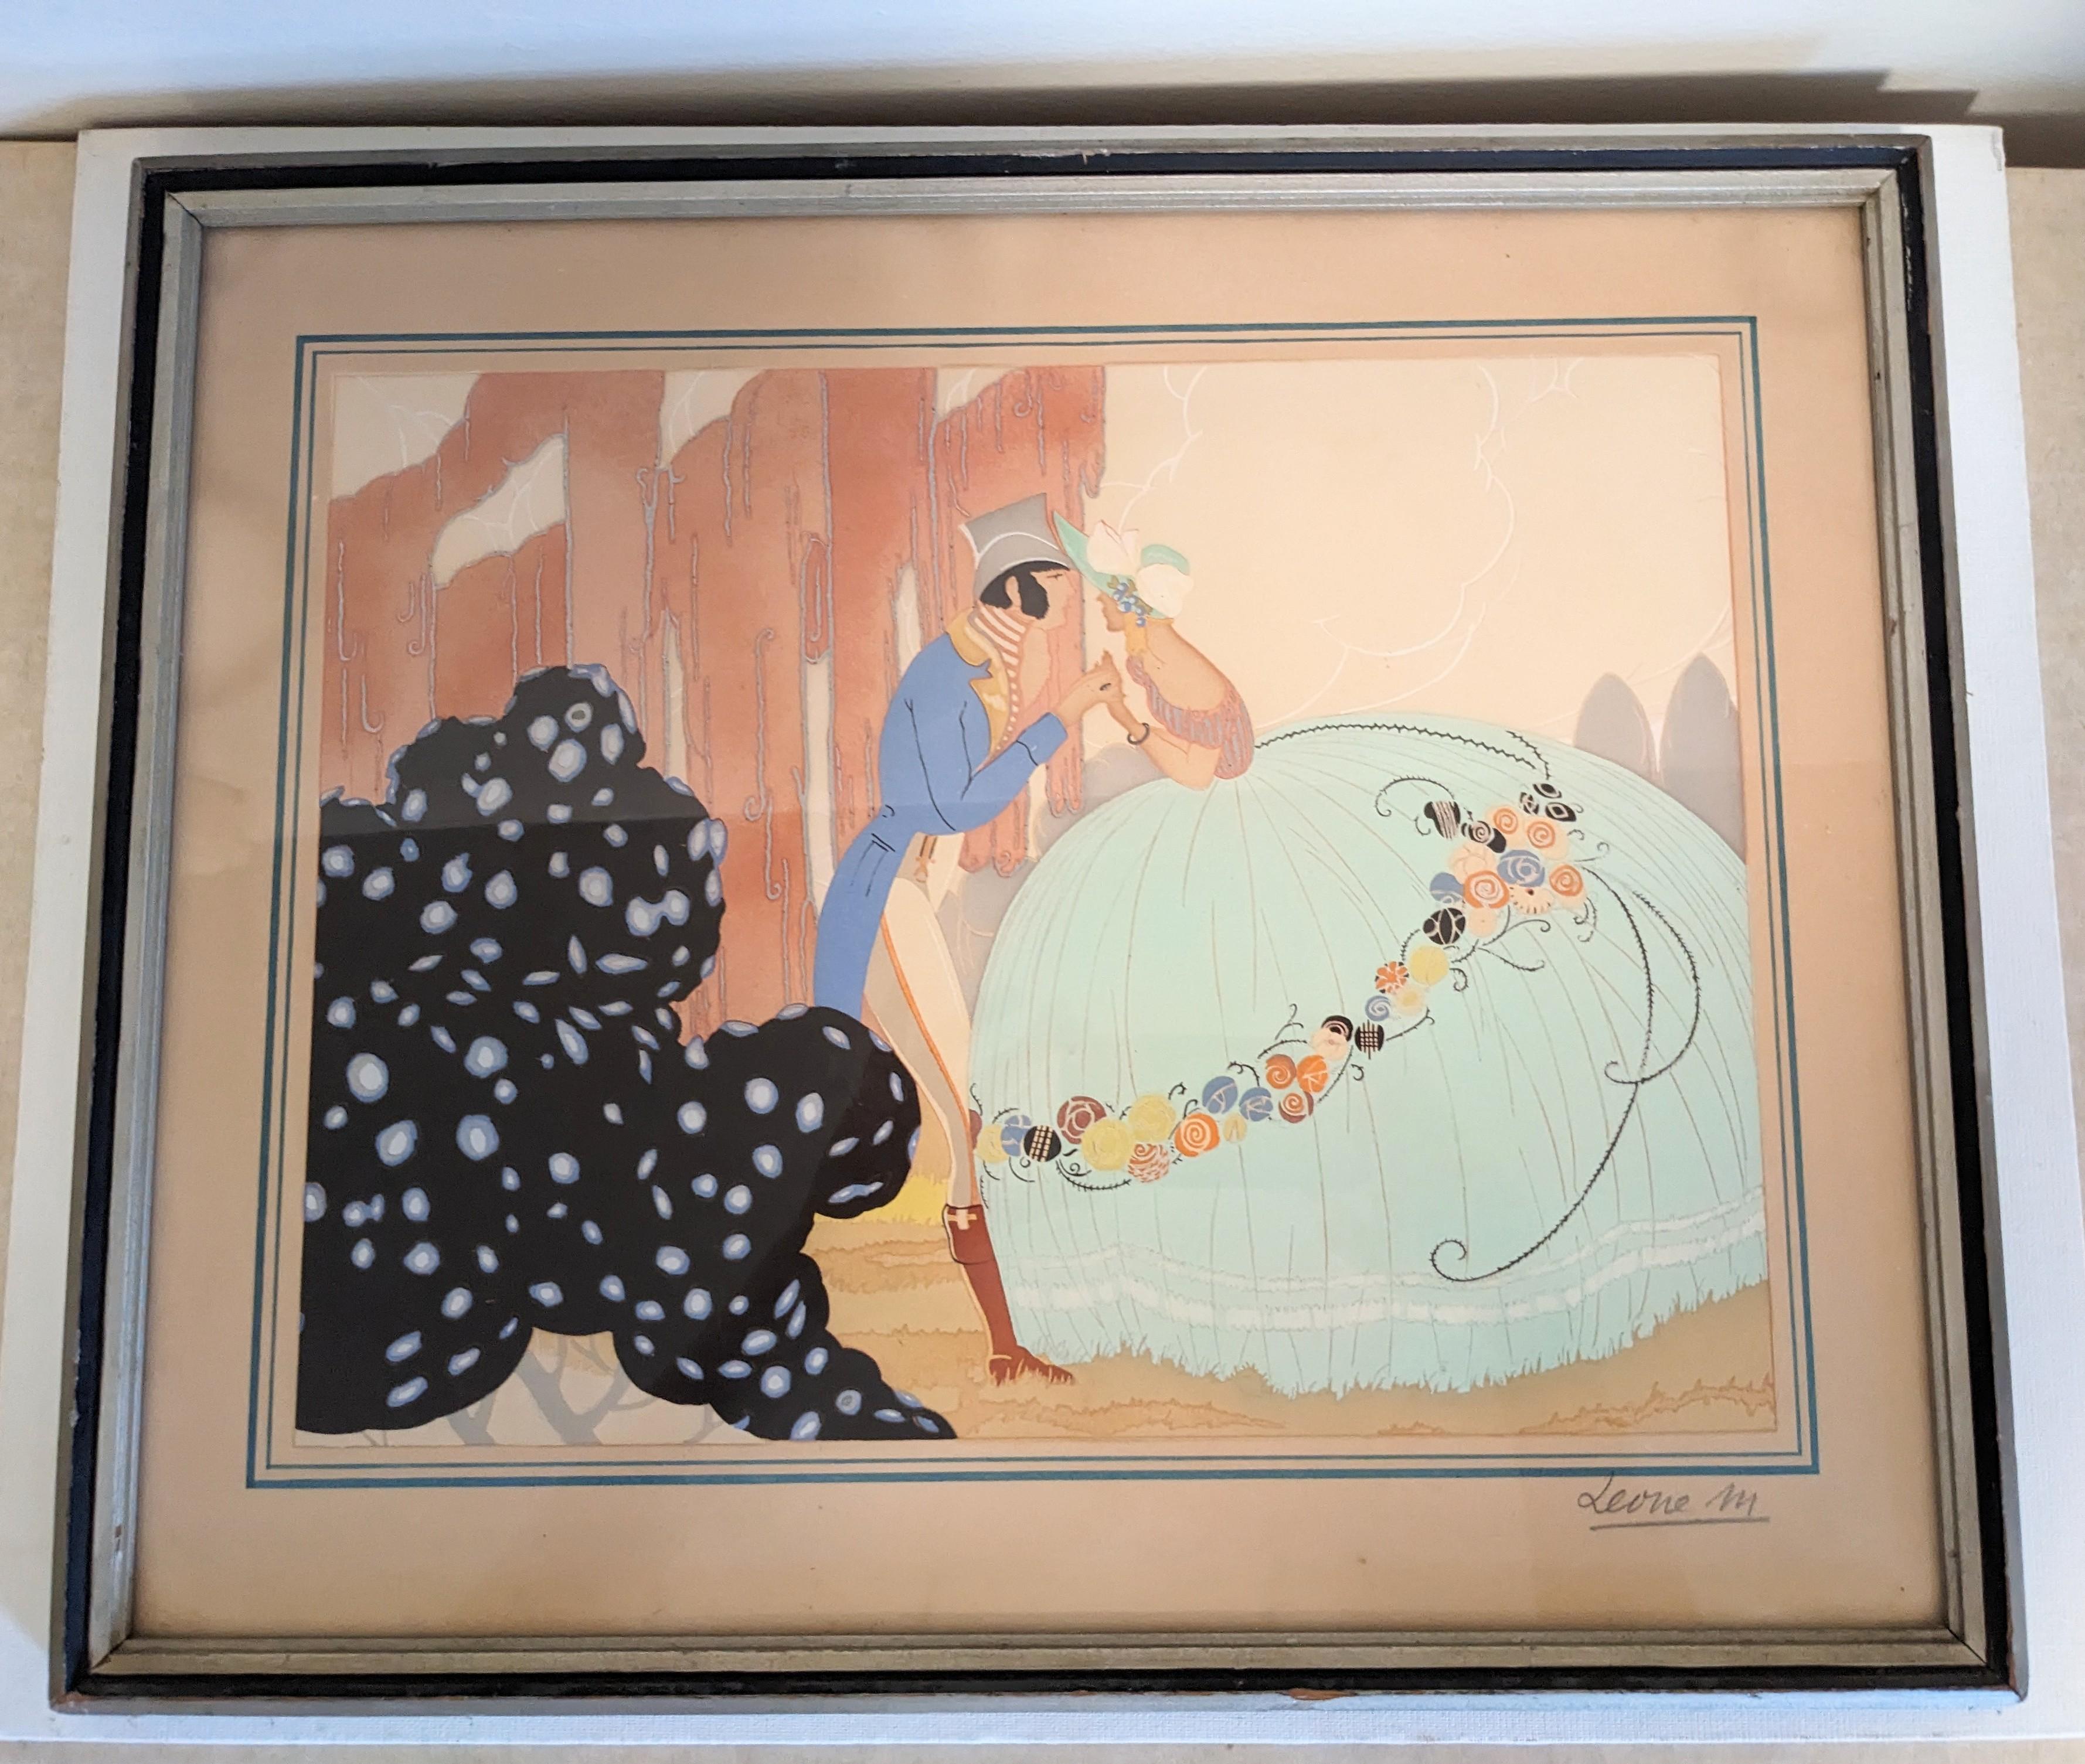 French Art Deco Hand Colored Fashion Print Pochoir by M. Leone. 1920's Hand colored print signed in the artist’s hand.
An early 20th-century French pochoir print signed Leone M. This Art Deco image depicts a young couple in period costume in a park